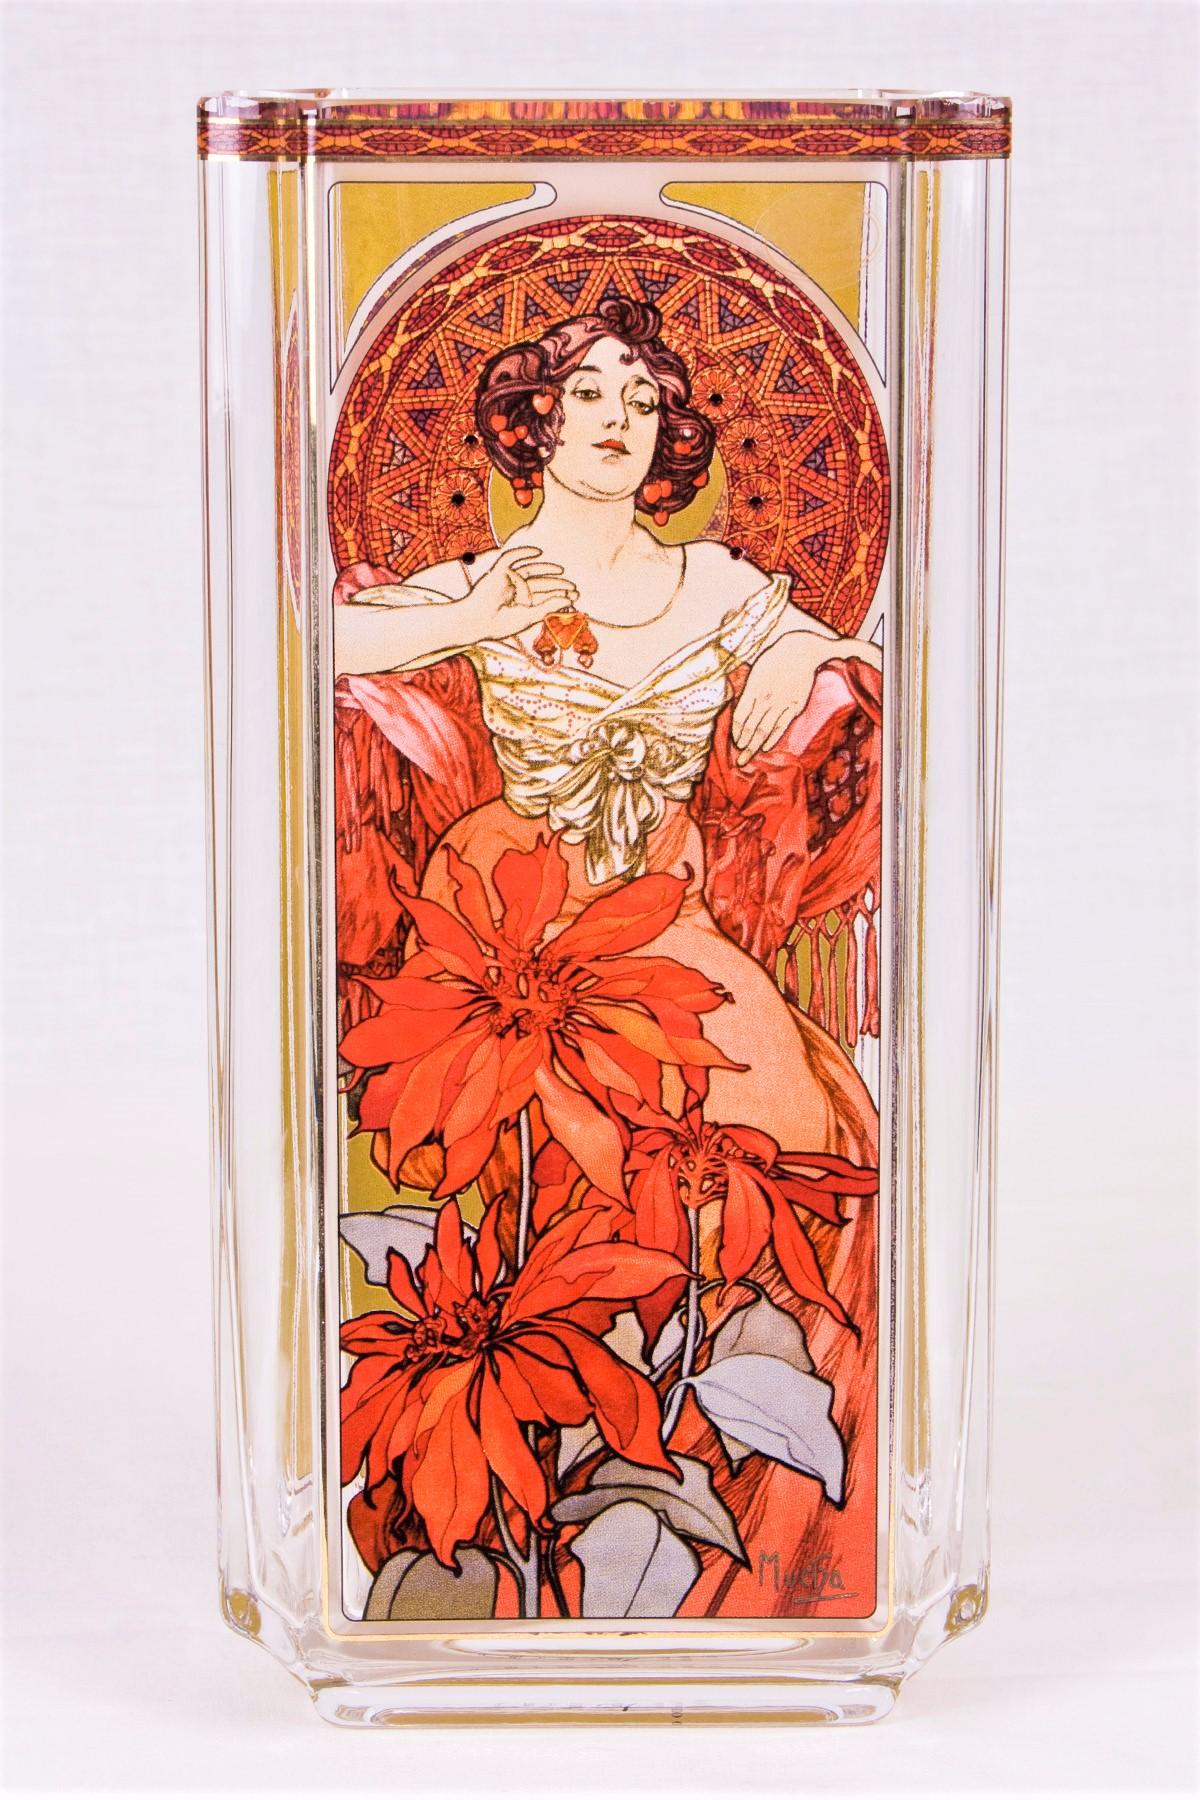 The Following Item we are offering is a STUNNING AND MAGNIFICENT Large Alphonse Mucha Four Seasons Ruby Poinsetta Floral Vase with Woman w/ Swarovski Crystals. An Exquisite Rare Limited Collectors Masterpiece!!! Perfect for any